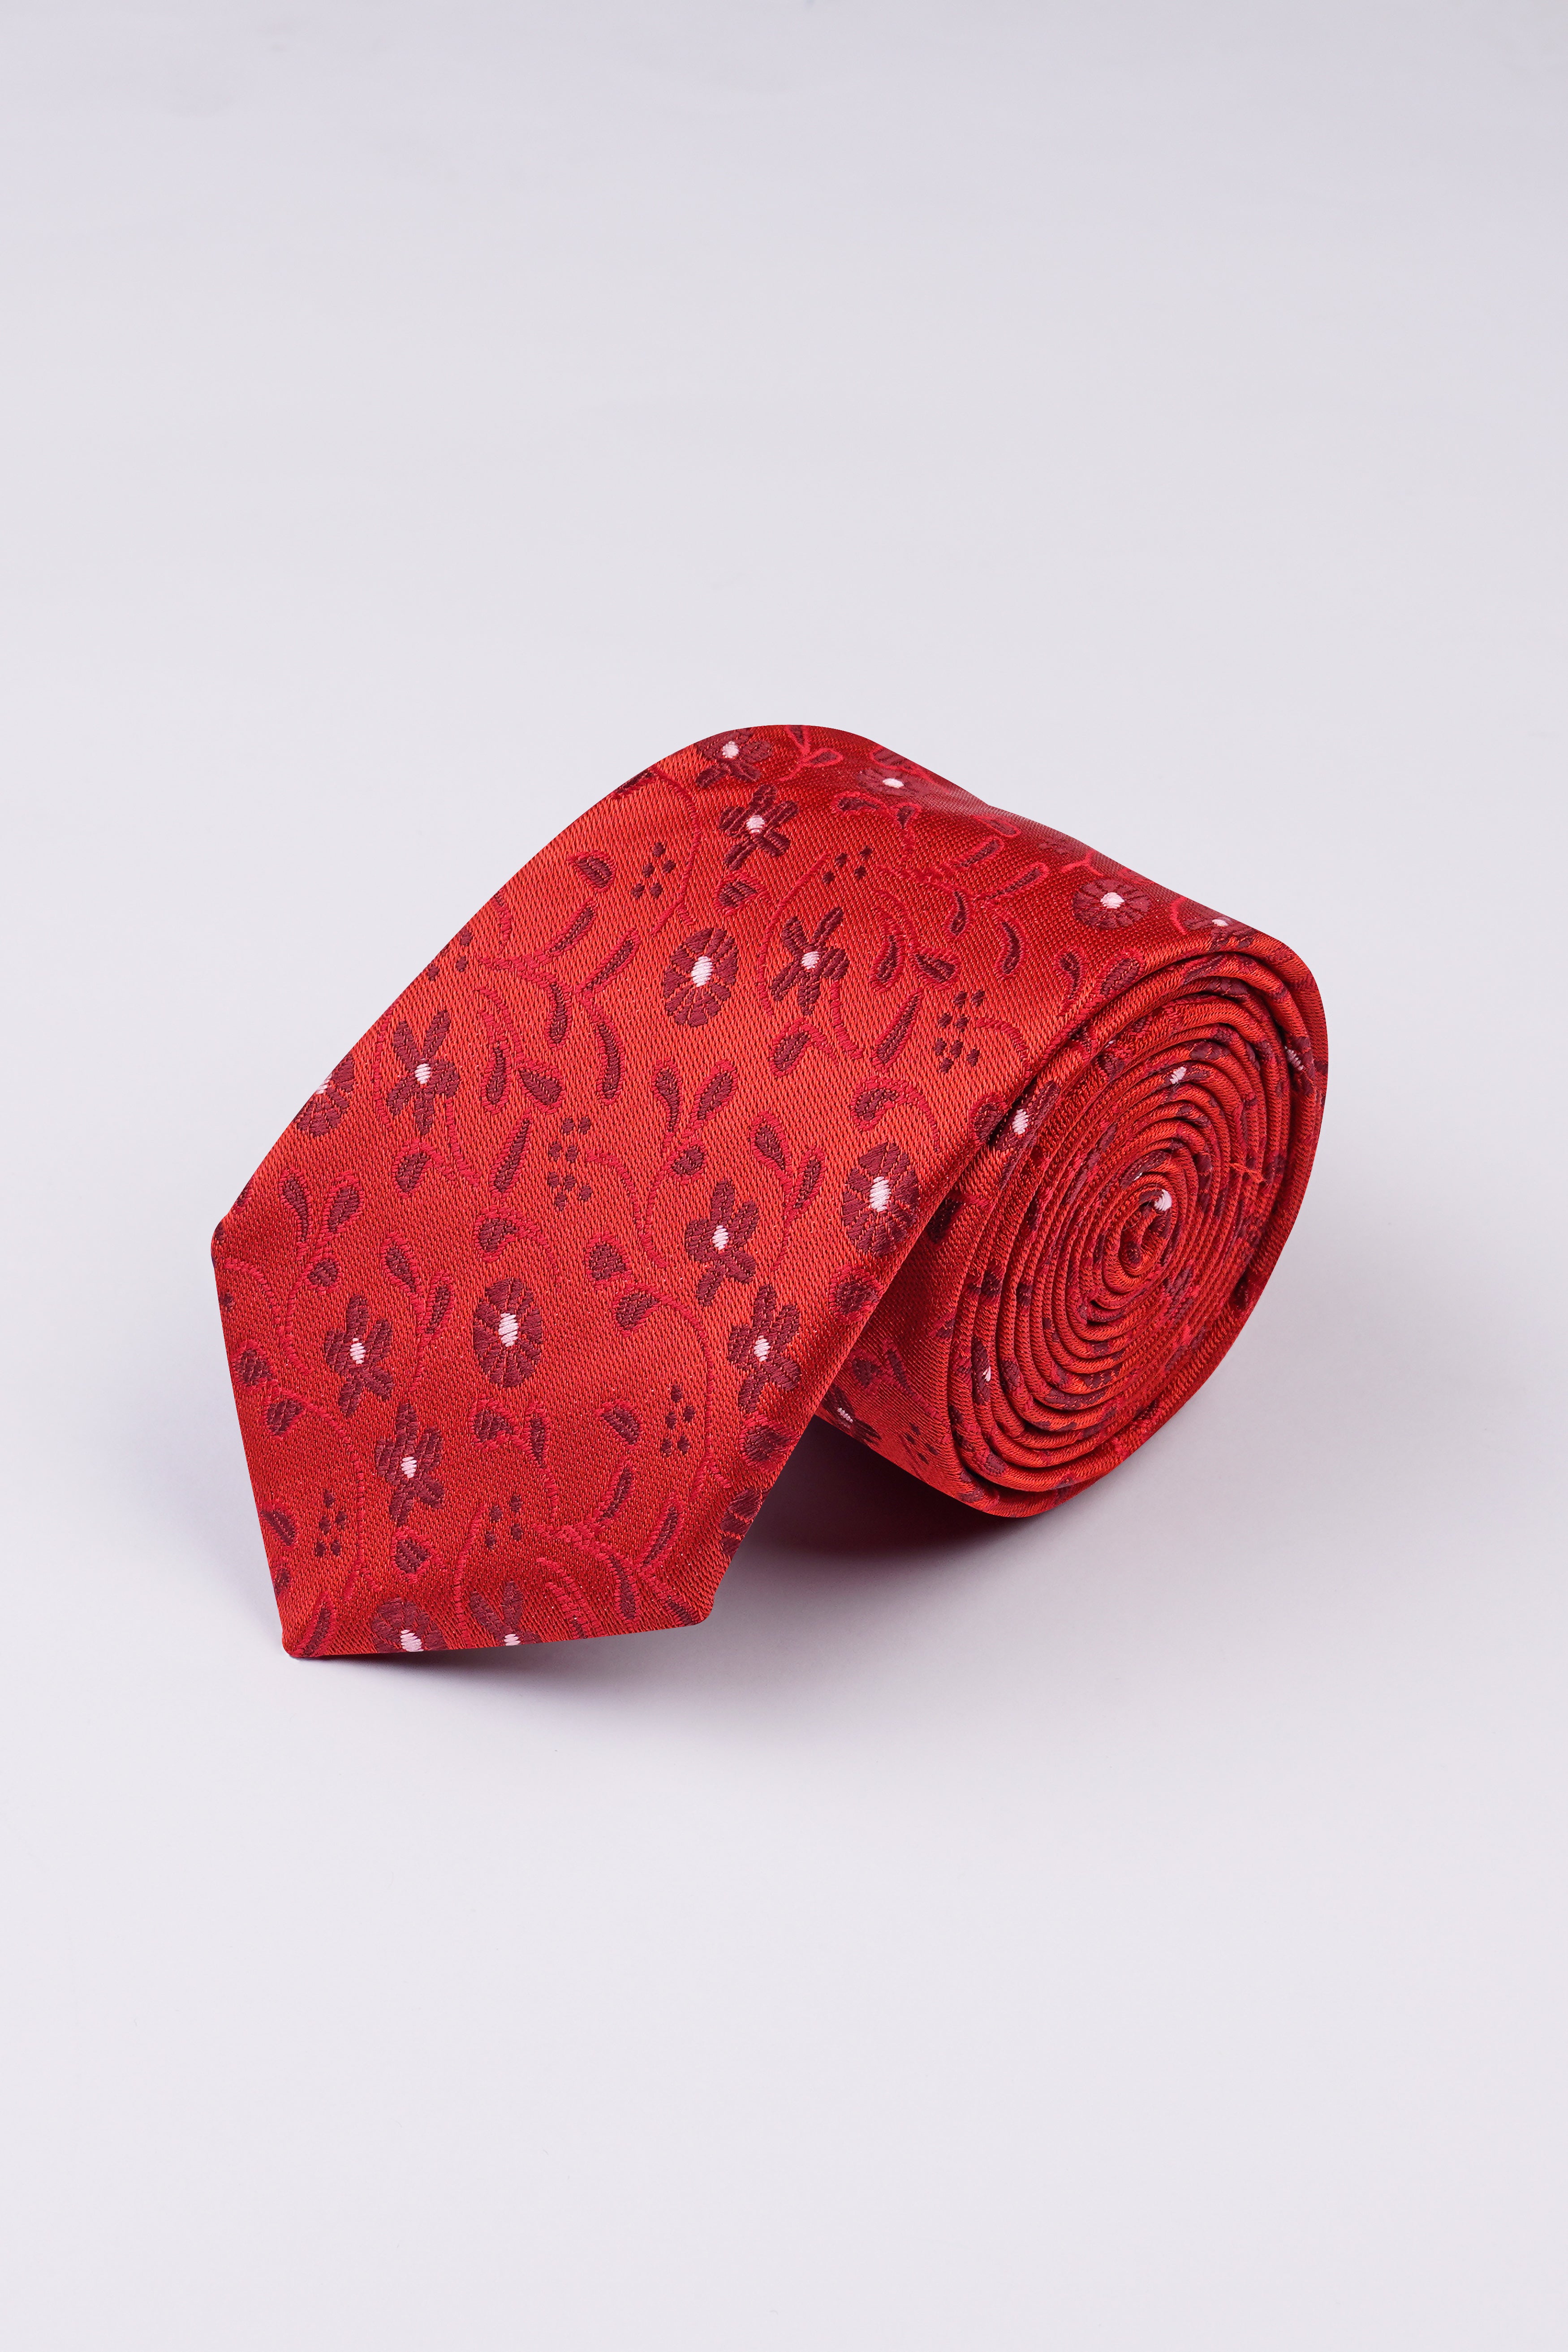 Mahogany Red Jacquard Textured Tie with Pocket Square  TP061